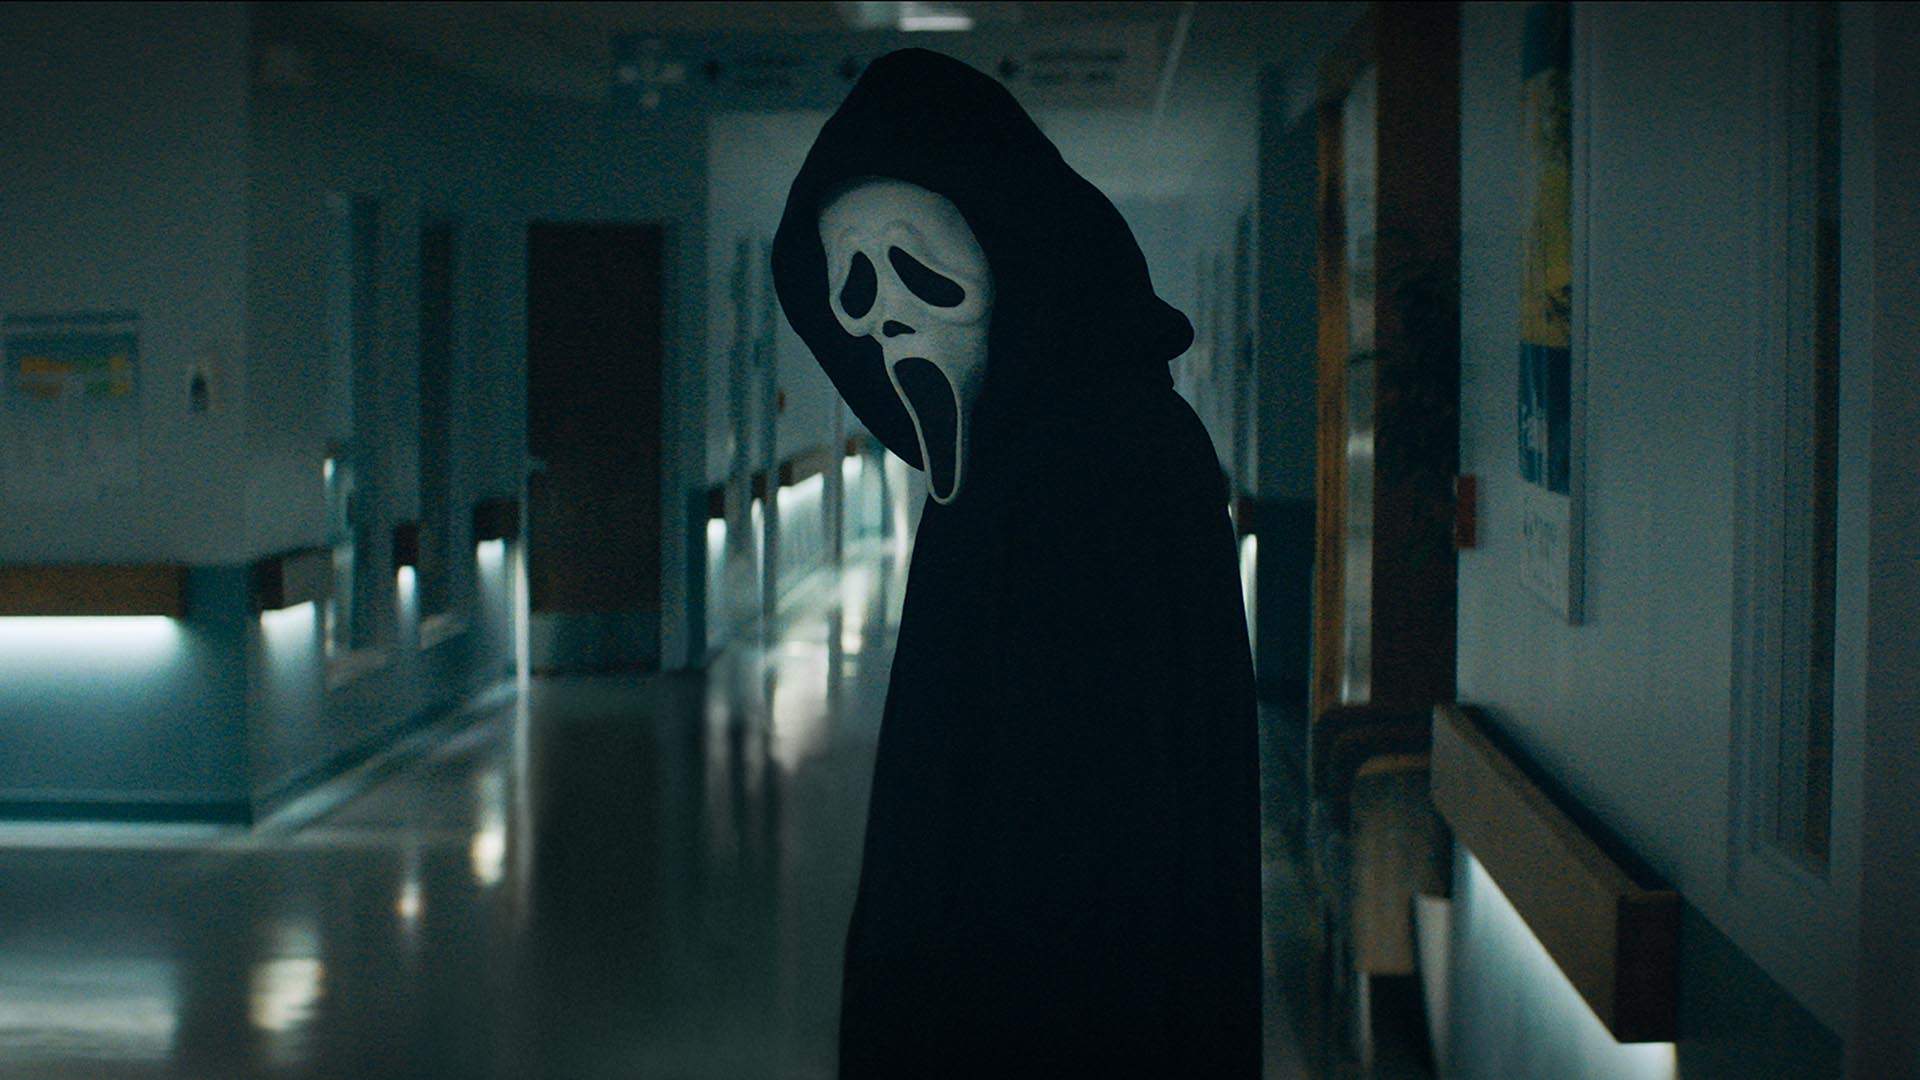 The Trailer for the New 'Scream' Sequel Is Here If You Like Scary Movies